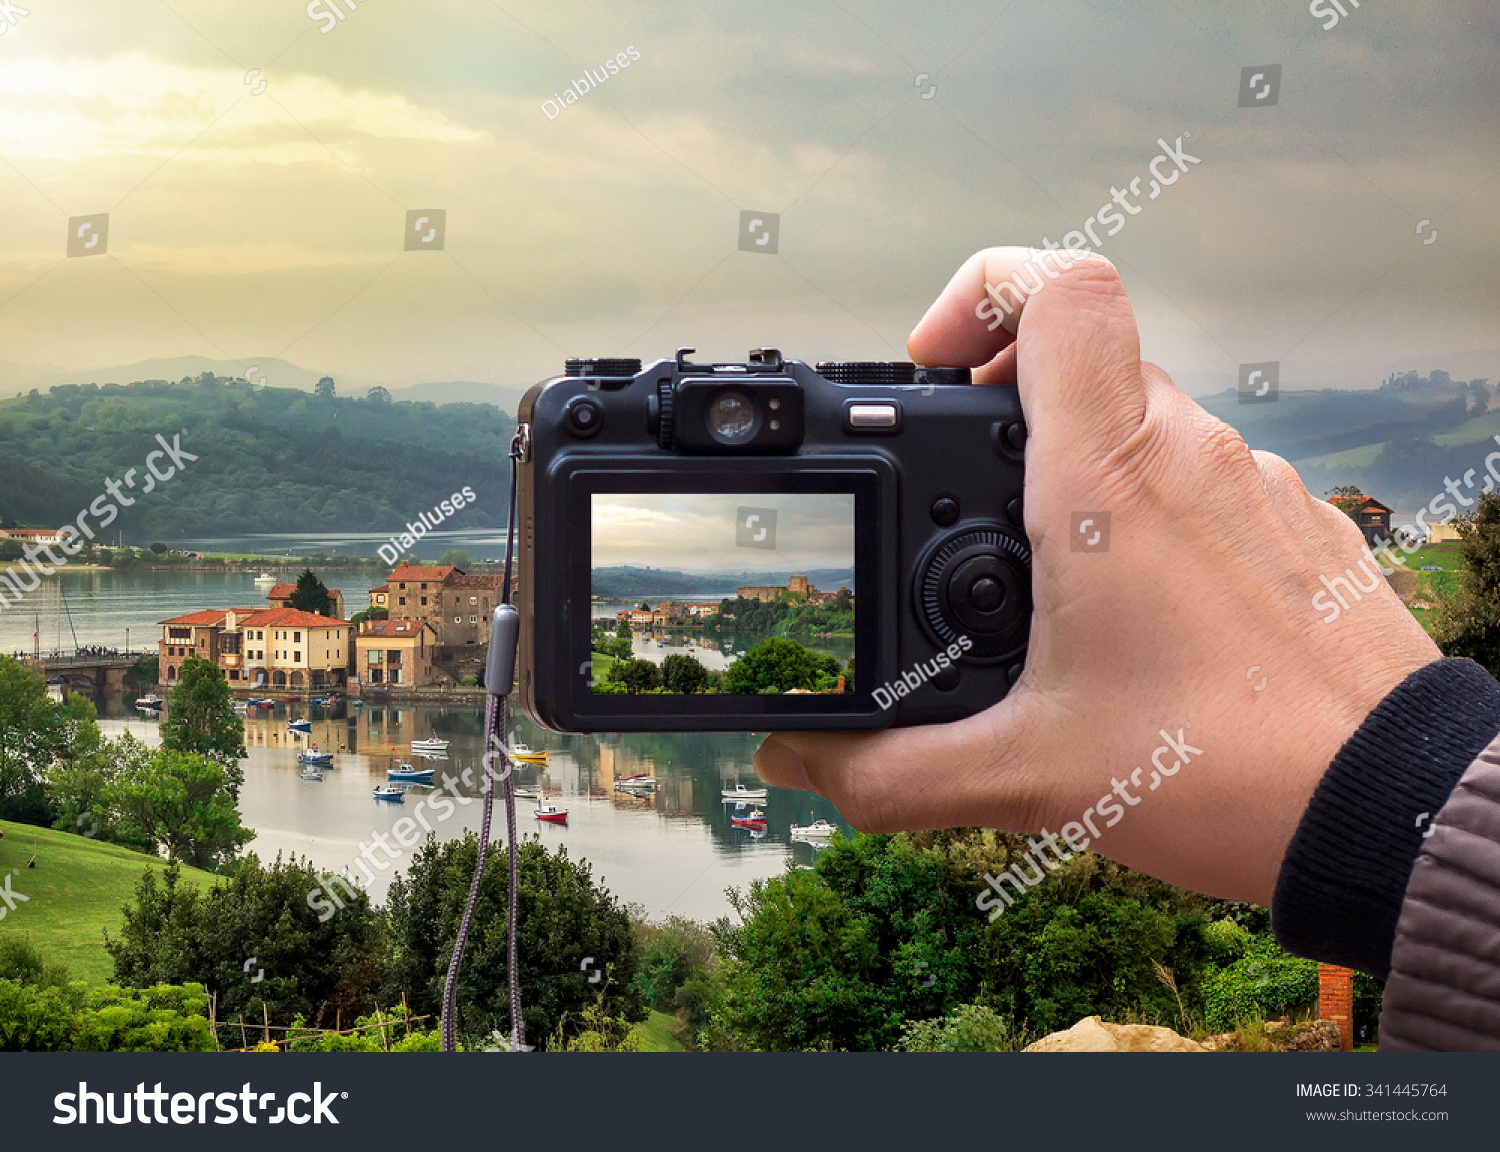 hand holding the Digital camera, shoot of landscape photo using liveview #341445764